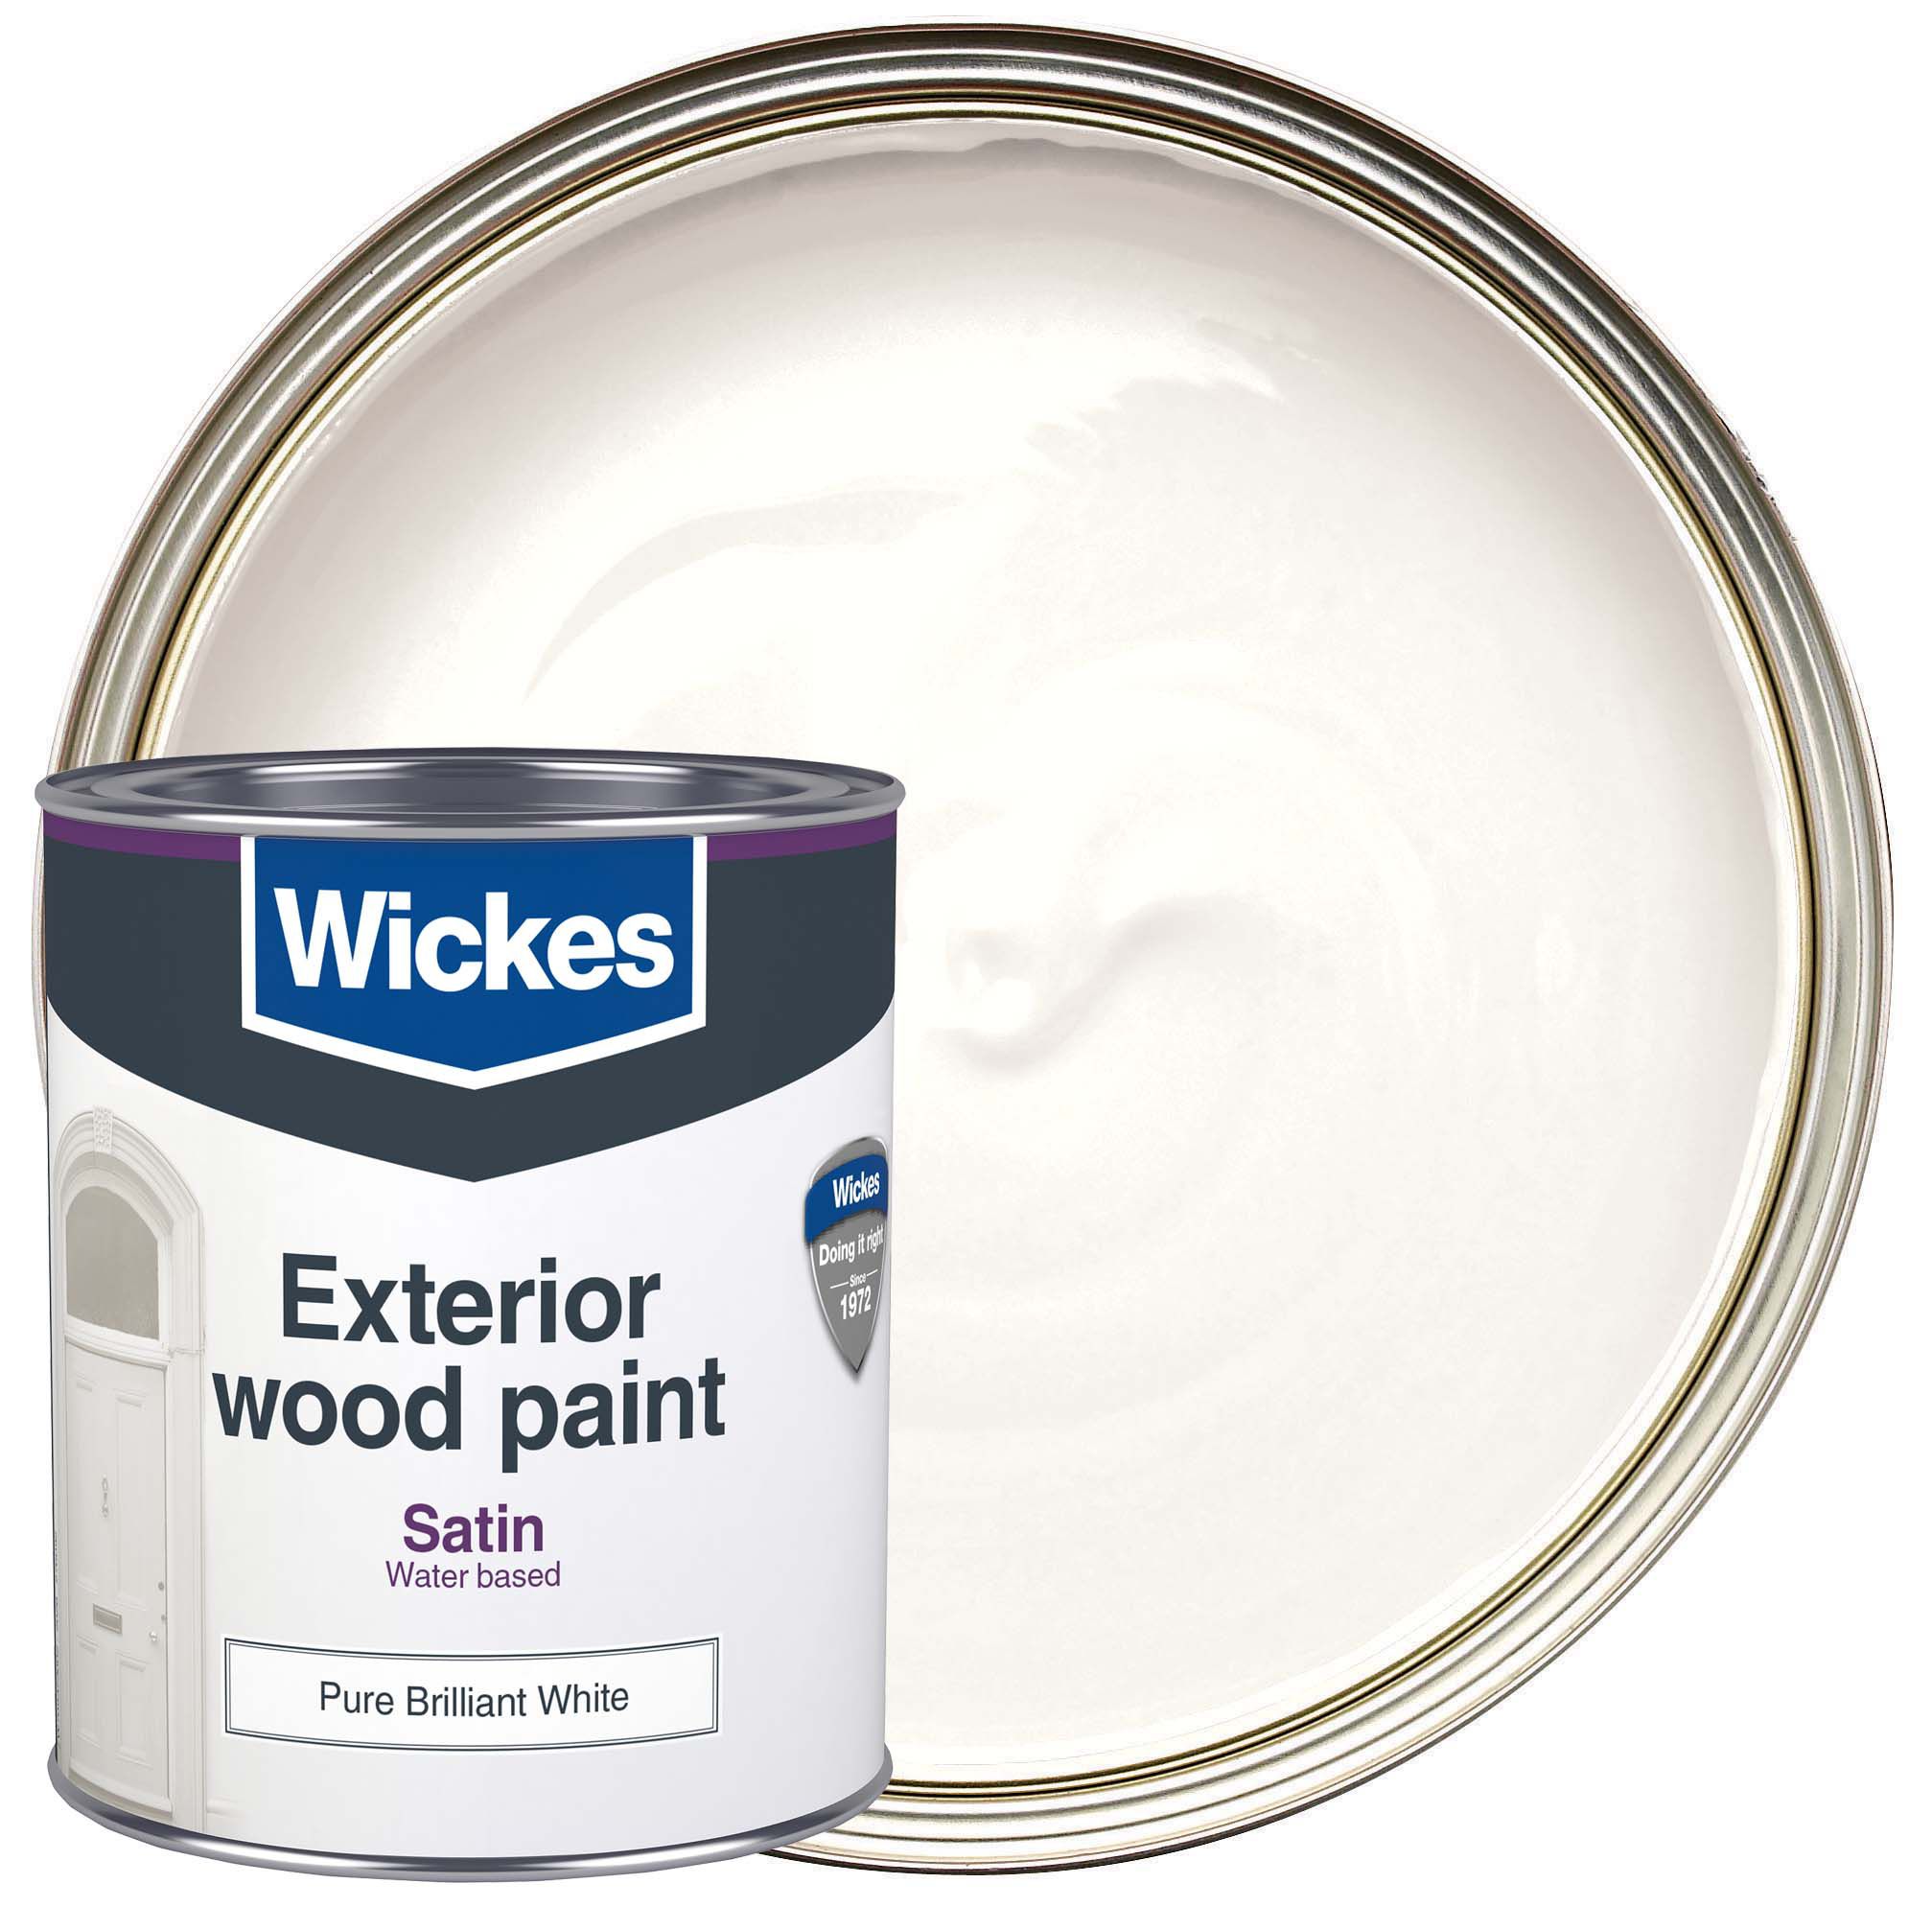 Image of Wickes Exterior Satinwood Paint Pure Brilliant White 750ml